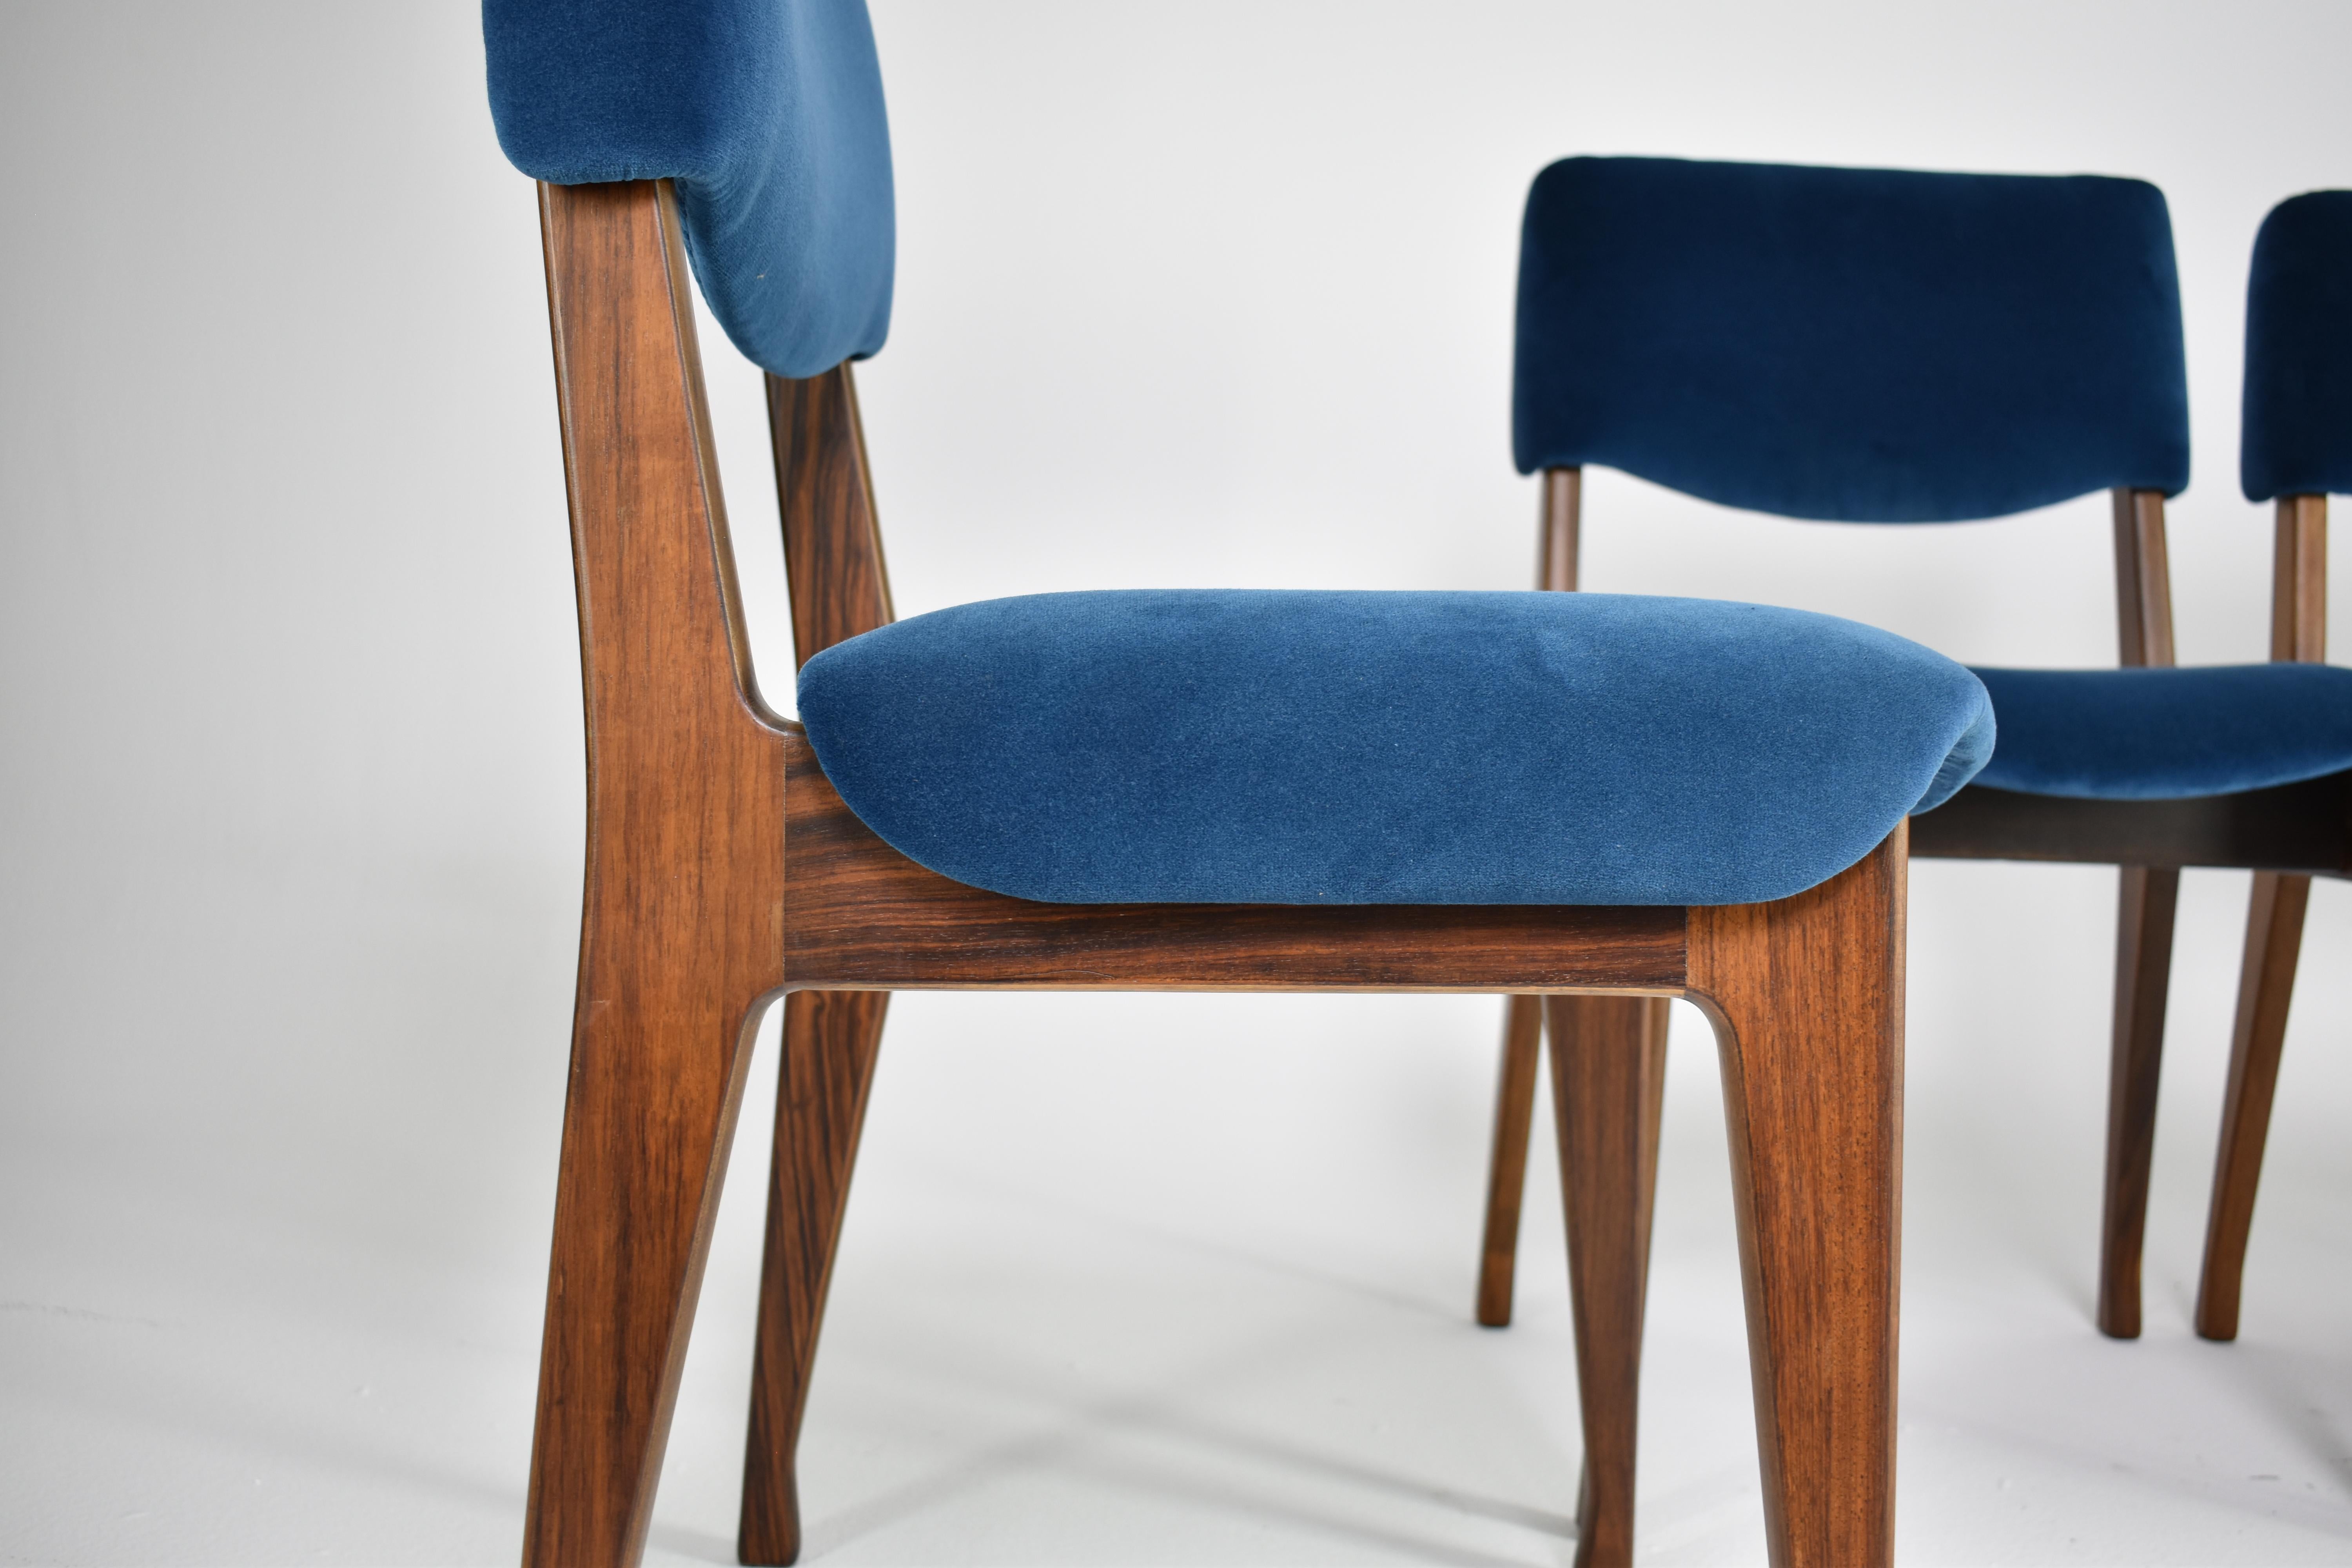 Velvet Italian Ico Parisi Wooden Dining Chairs, Set of Four, 1950s-60s For Sale